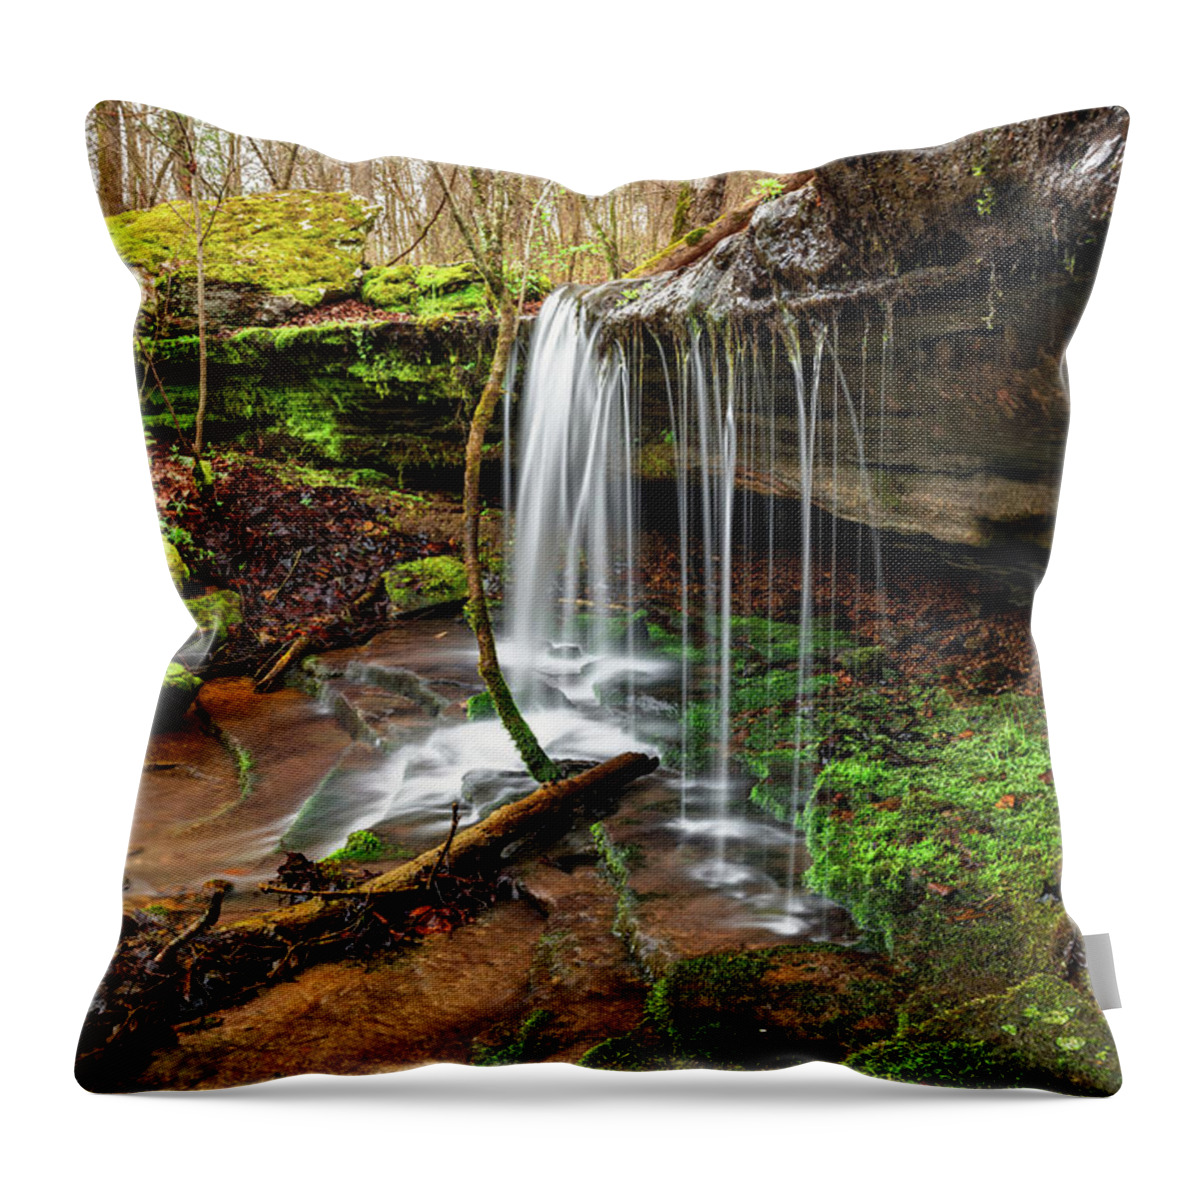 Arkansas Waterfall Throw Pillow featuring the photograph Arkansas Warm Fork River Tributary Waterfall - Tea Kettle Falls Trail by Gregory Ballos